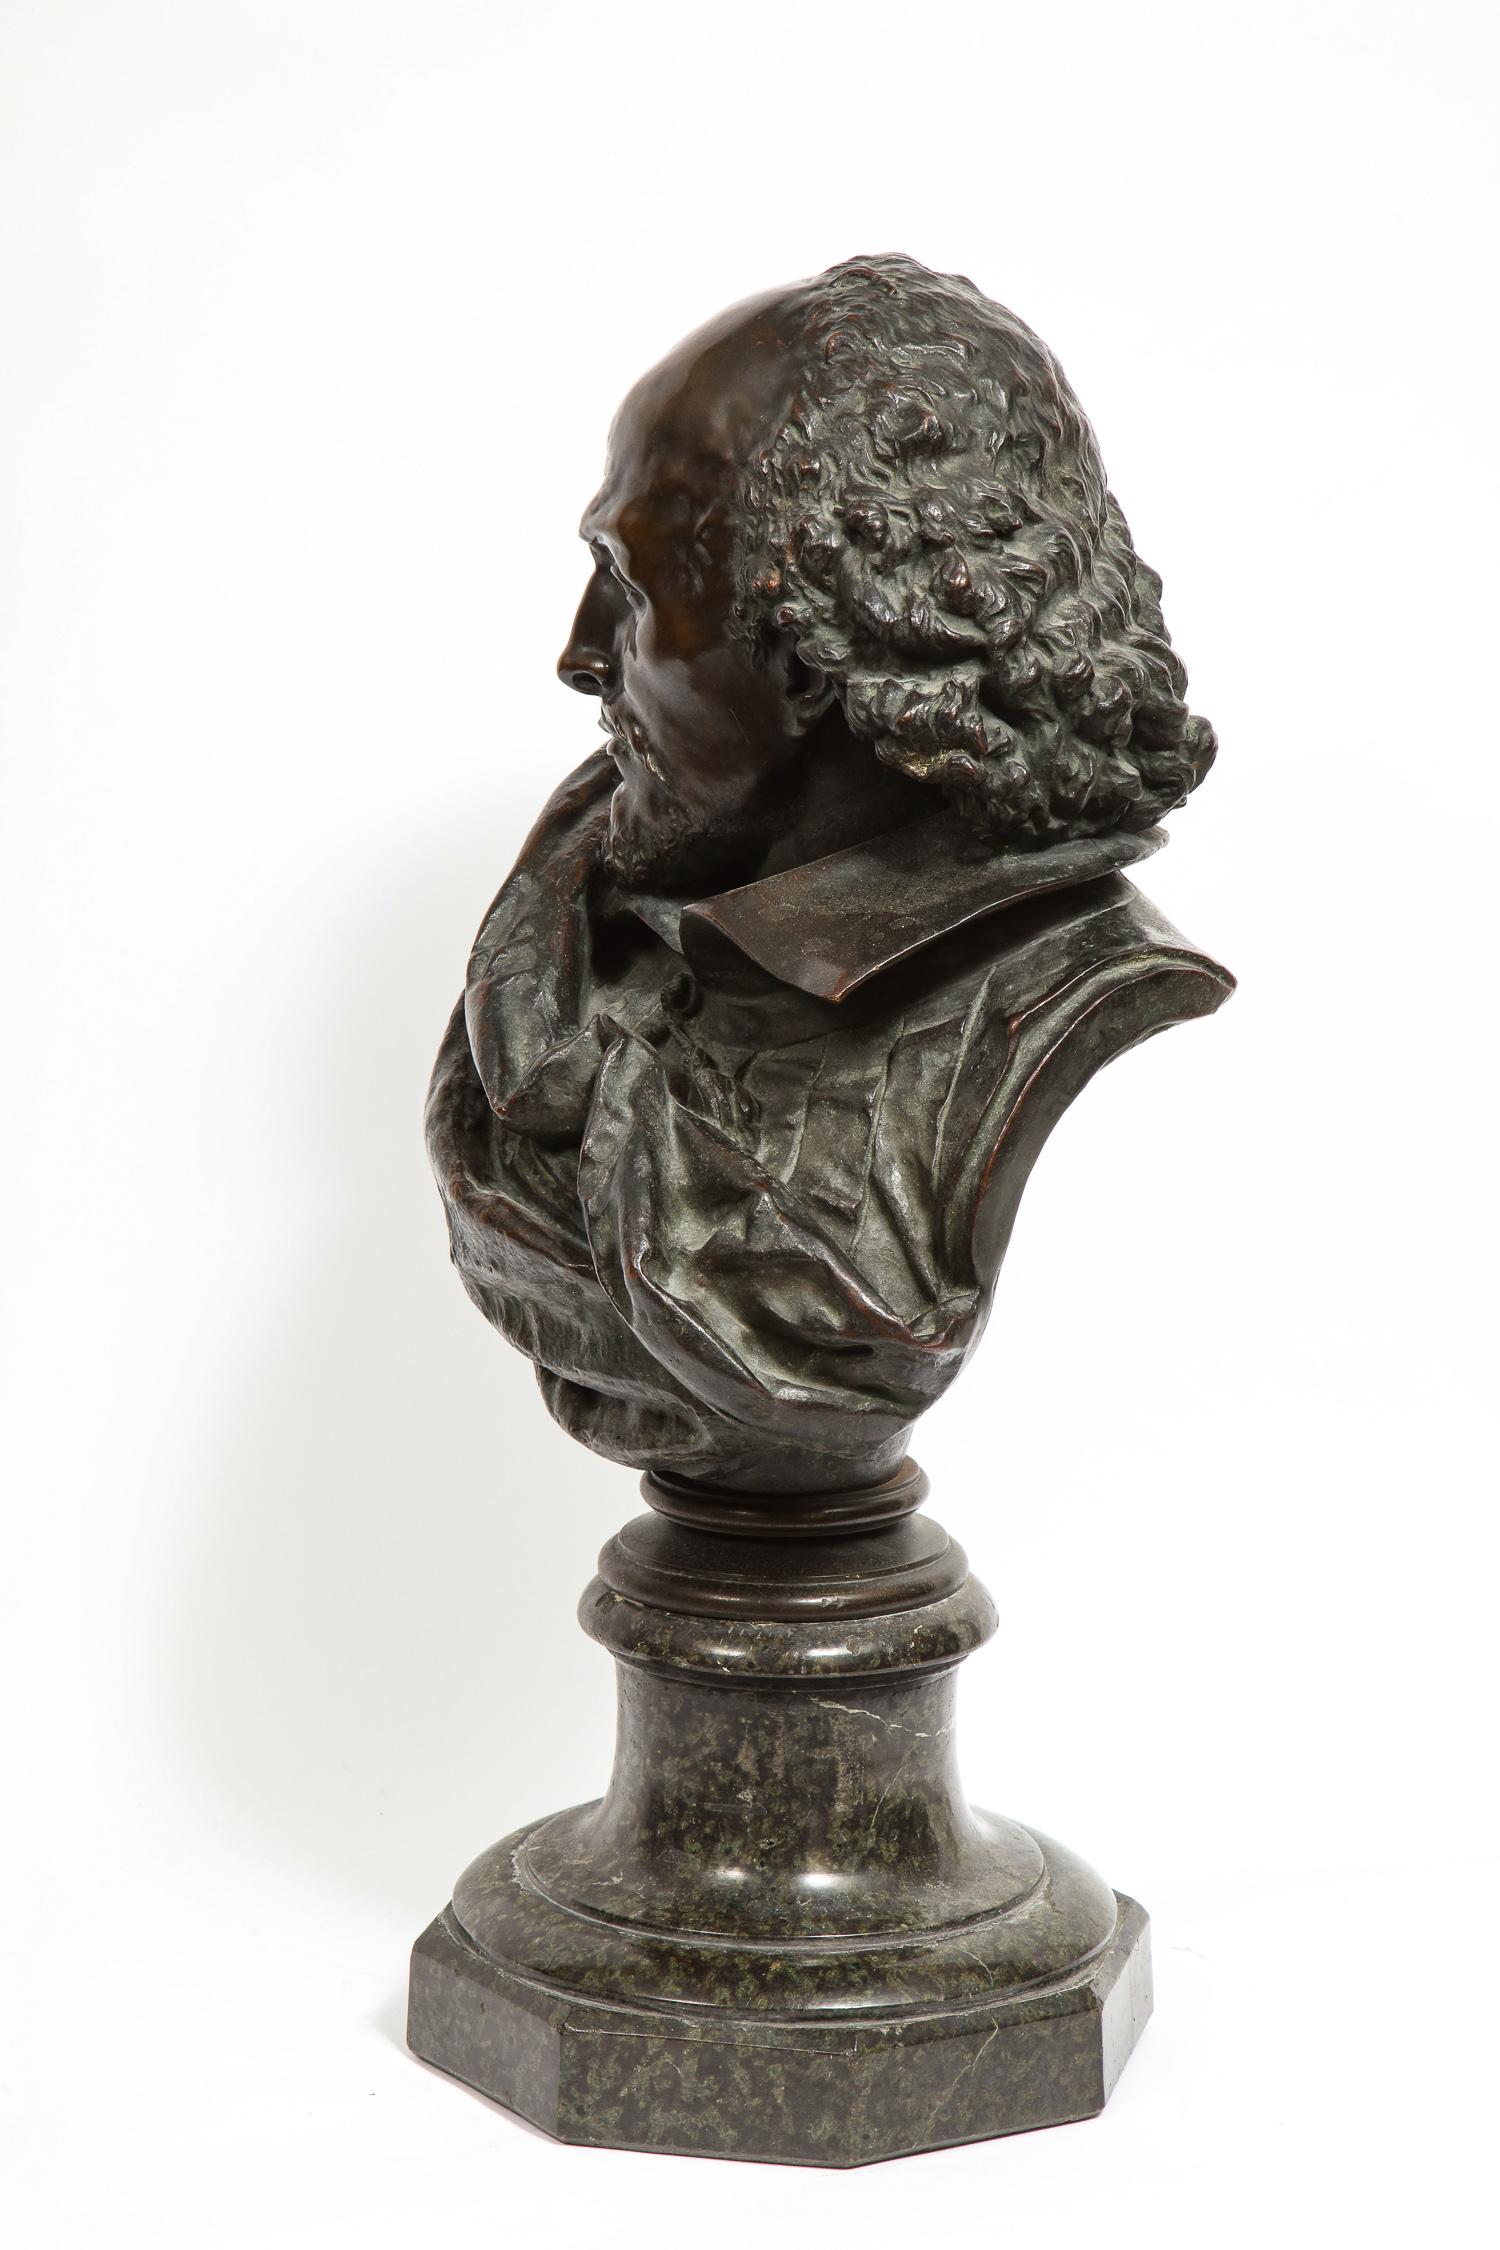 Rare French Patinated Bronze Bust of William Shakespeare, Carrier-Belleuse 13